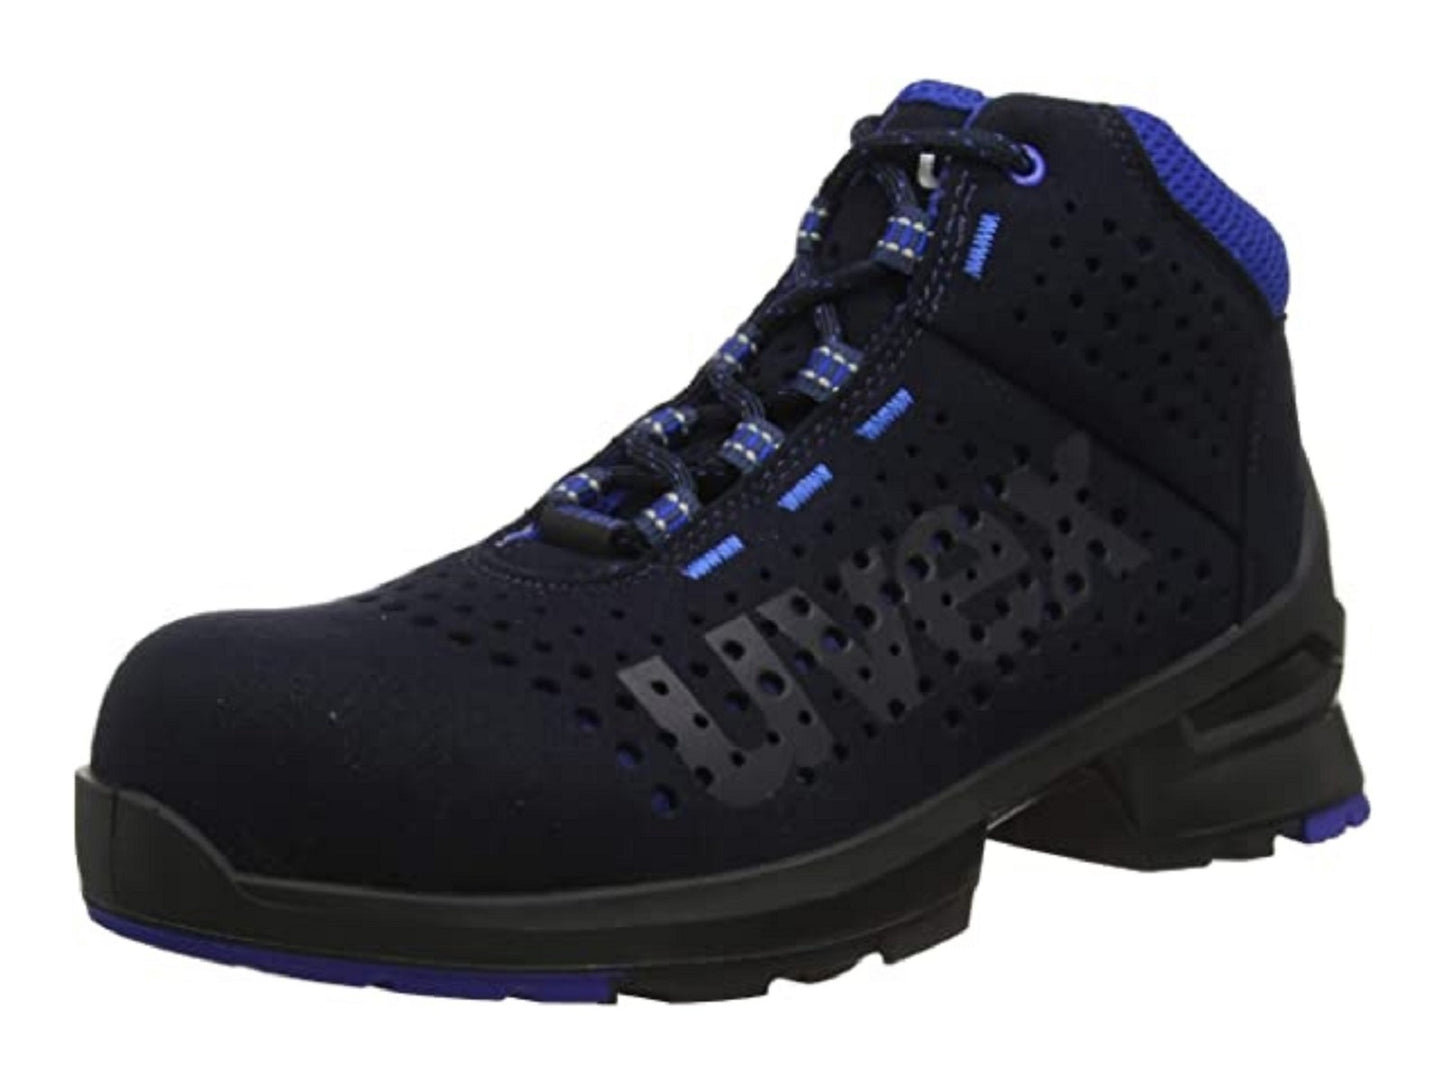 uvex 1 85328 uvex 1 safety boots perforated microsuede uppers blue S1 SRC protexU